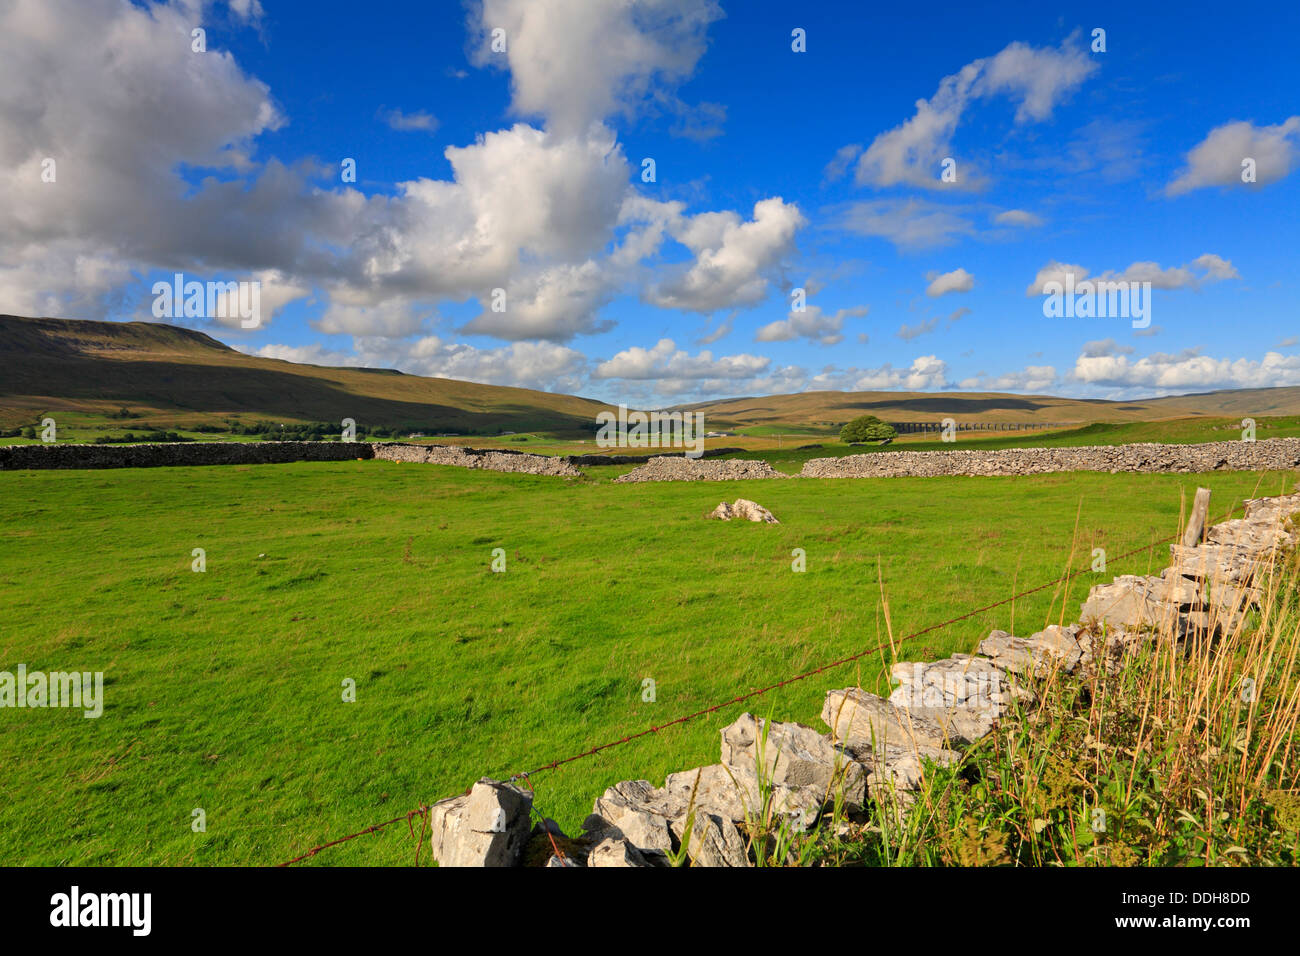 Whernside, Ribblehead Viaduct and Blea Moor from Chapel le Dale, North yorkshire, Yorkshire Dales National Park, England, UK. Stock Photo